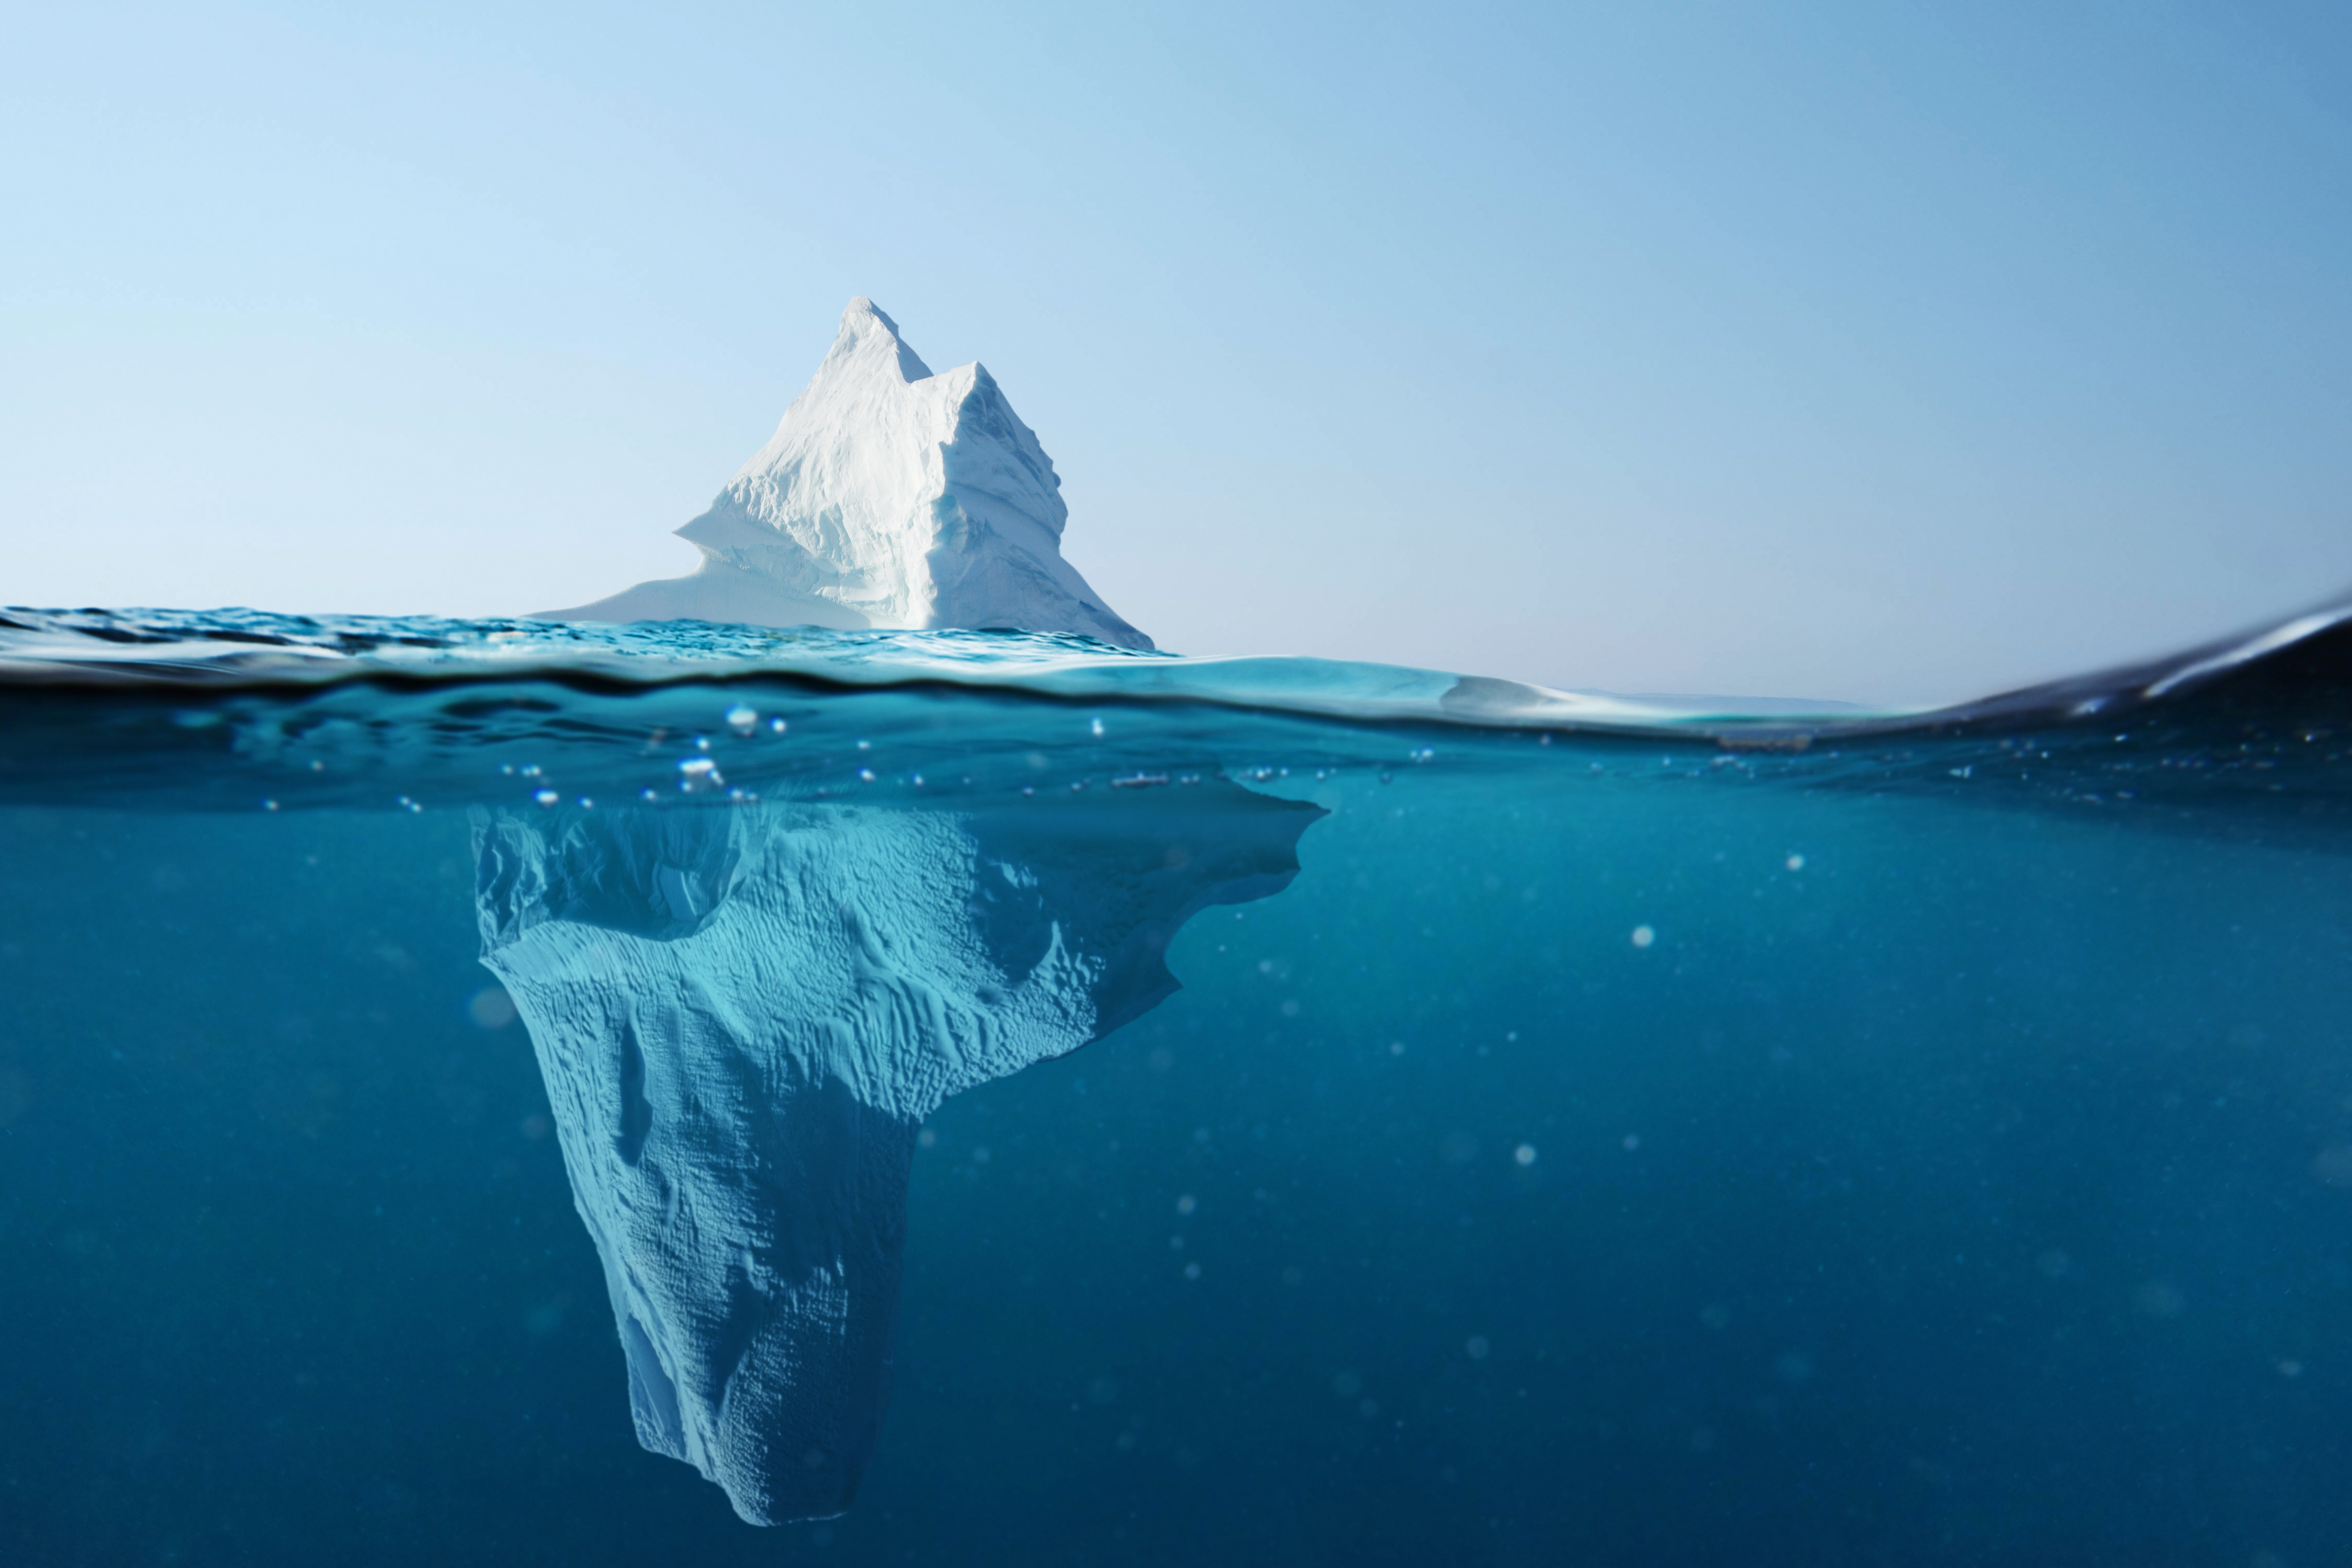 Cross-section of iceberg with a view underwater